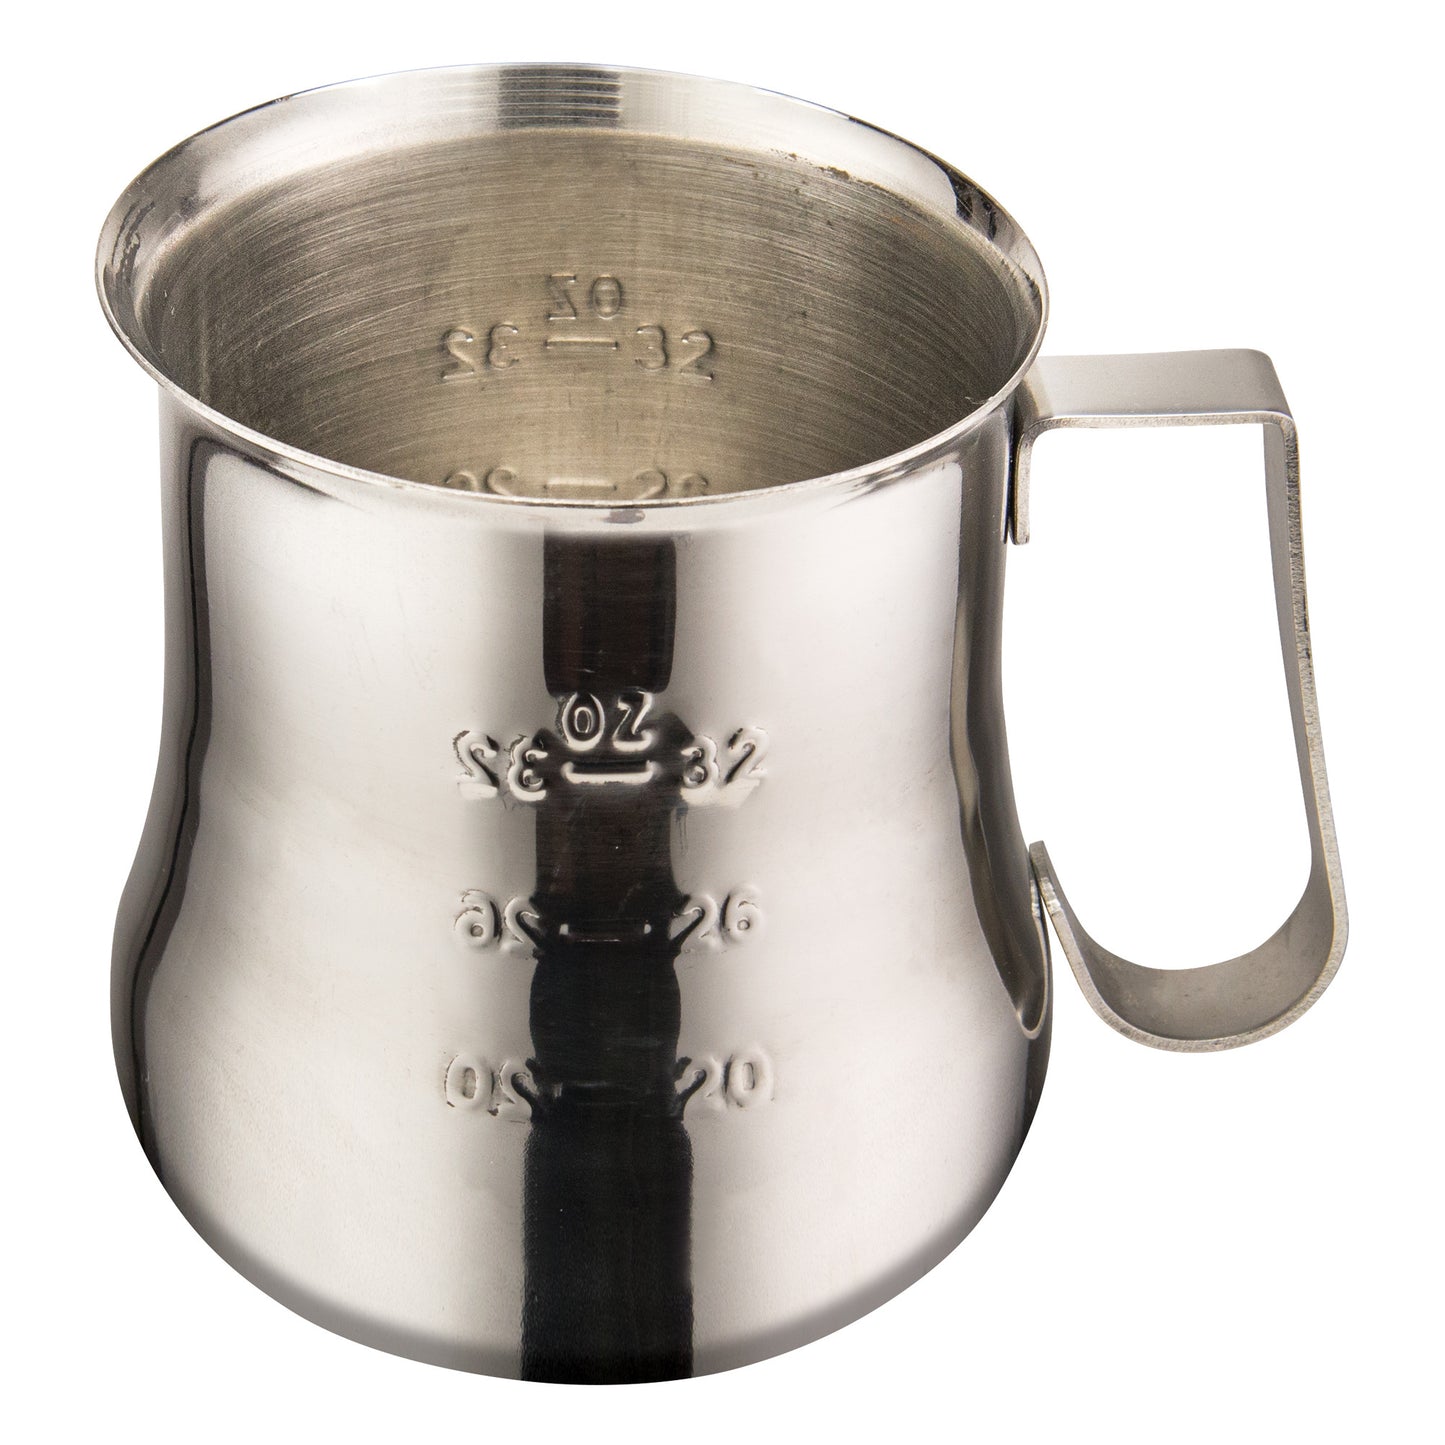 WPE-40 - Espresso Milk Frothing Pitcher, Stainless Steel - 40 oz